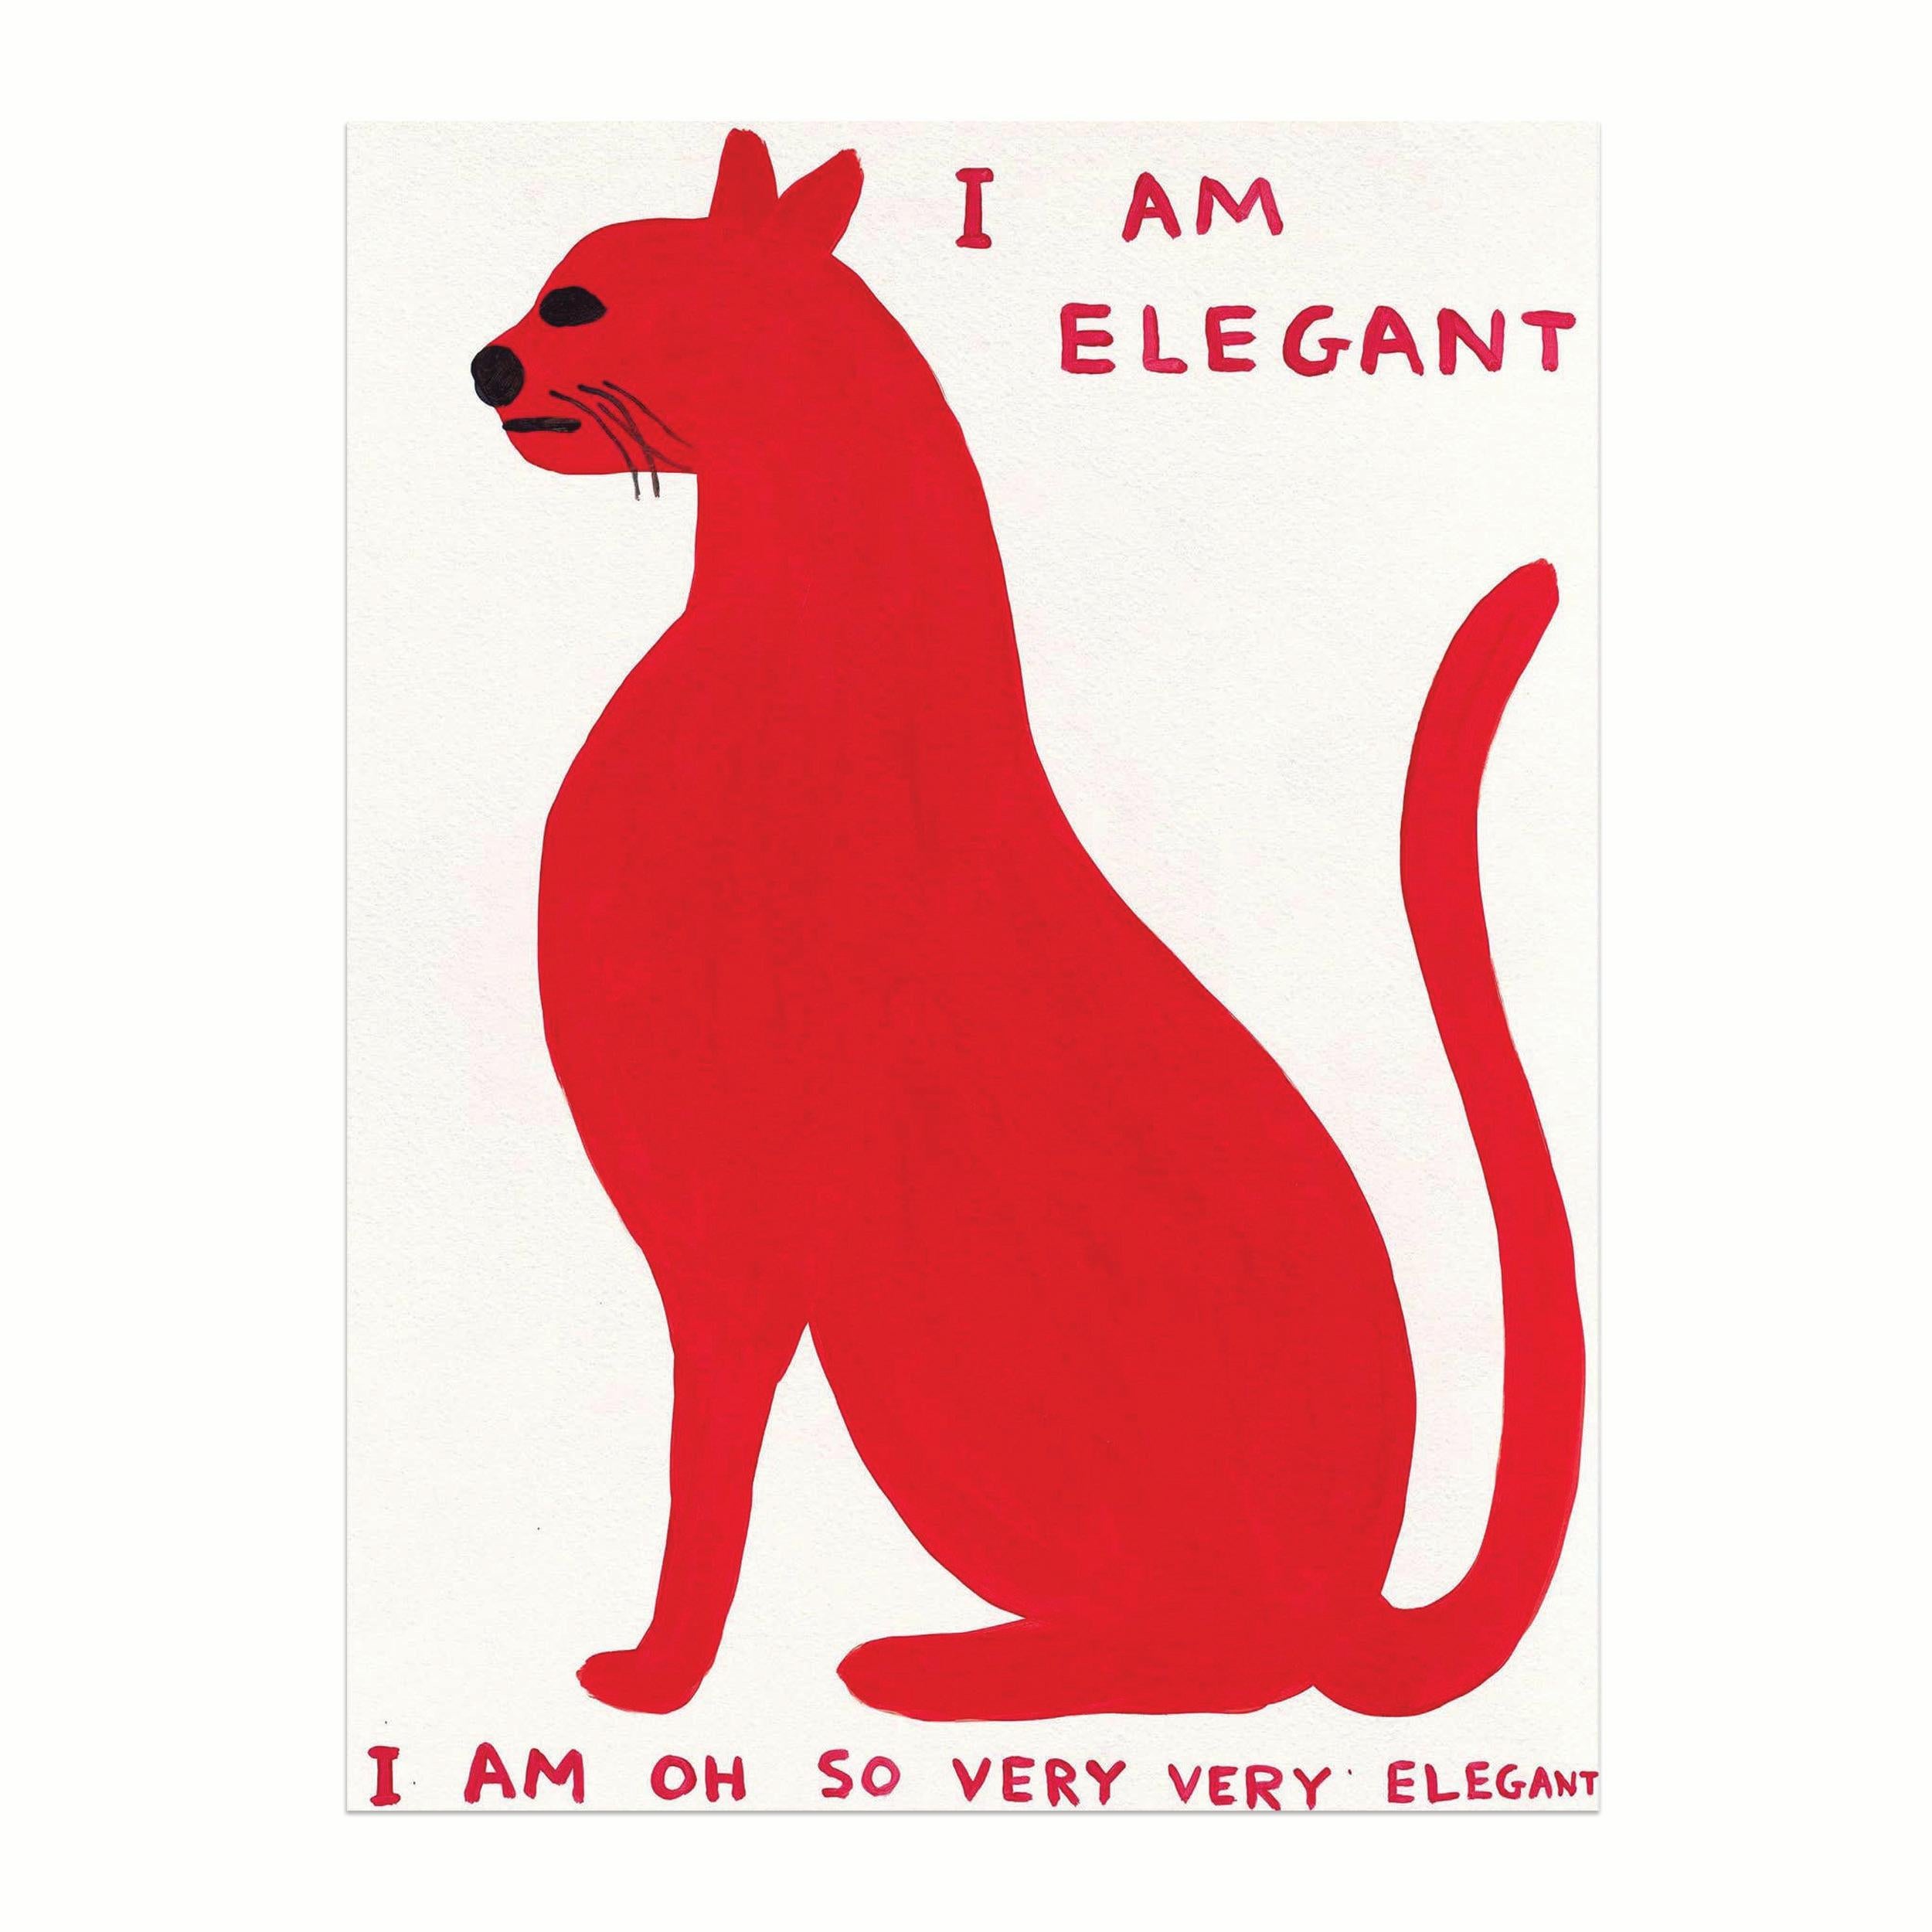 David Shrigley (British, b. 1968)
I Am Elegant, 2021
Medium: Screenprint in colours, on wove paper
Dimensions: 76 x 56 cm (29.9 x 22 in)
Edition of 125: Hand signed and numbered on accompanying certificate
Condition: Very good